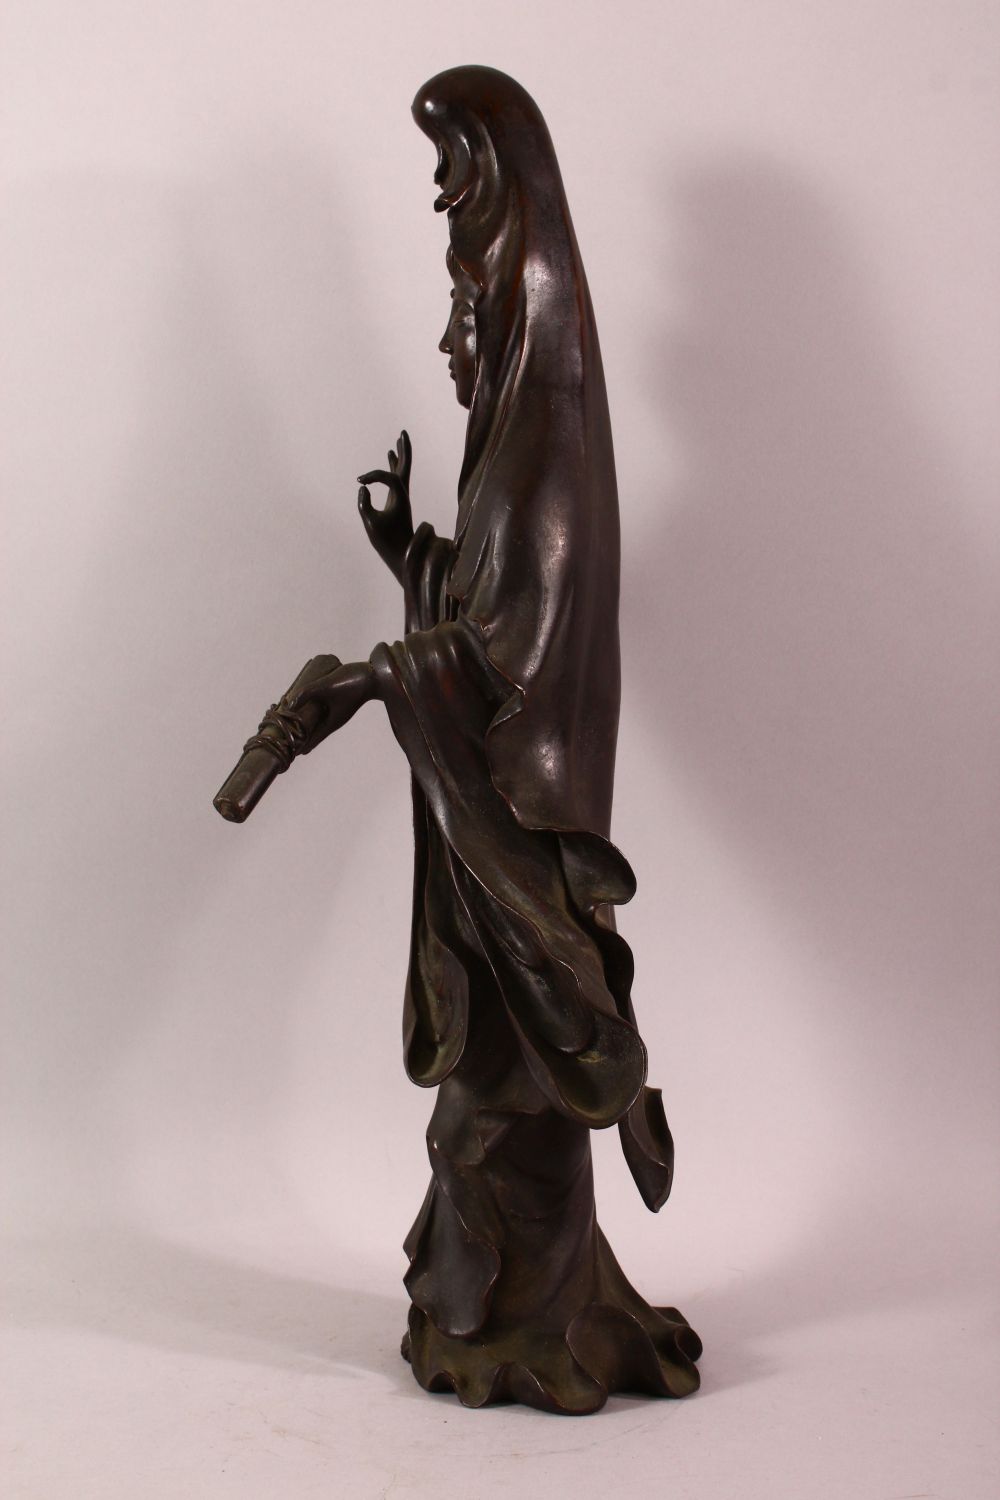 A CHINESE BRONZE FIGURE OF GUANYIN holding a scroll, her other hand raised in a mindfulness gesture, - Image 4 of 8